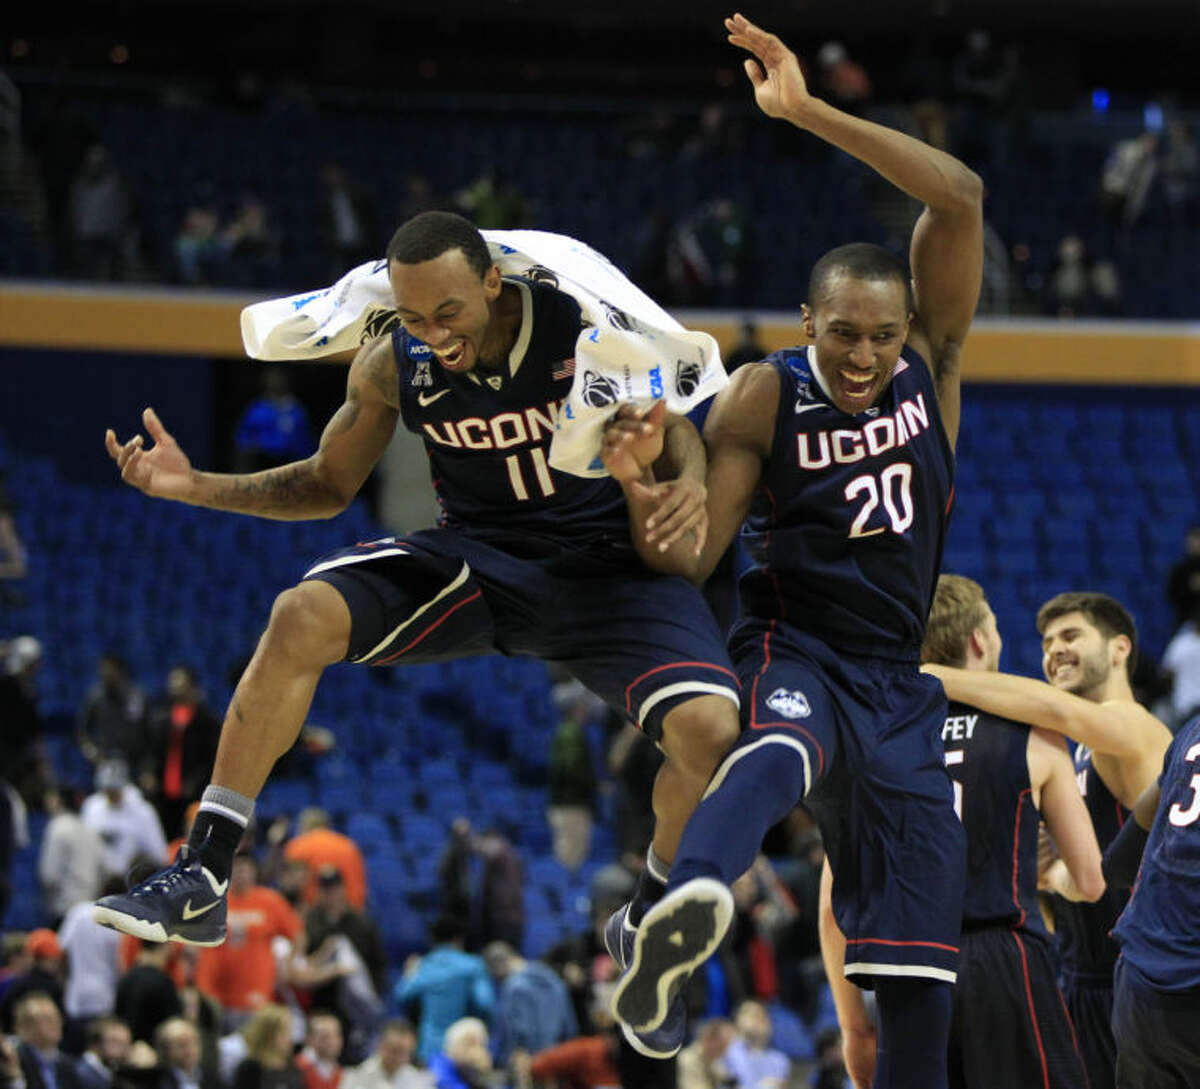 UConn's Ryan Boatright (11) and Lasan Kromah (20) celebrate their team's 77-65 victory over Villanova in the third-round game in the men's NCAA college basketball tournament at the First Niagara Center, Sunday, March 23, 2014. (AP Photo/The Buffalo News, Harry Scull Jr.)